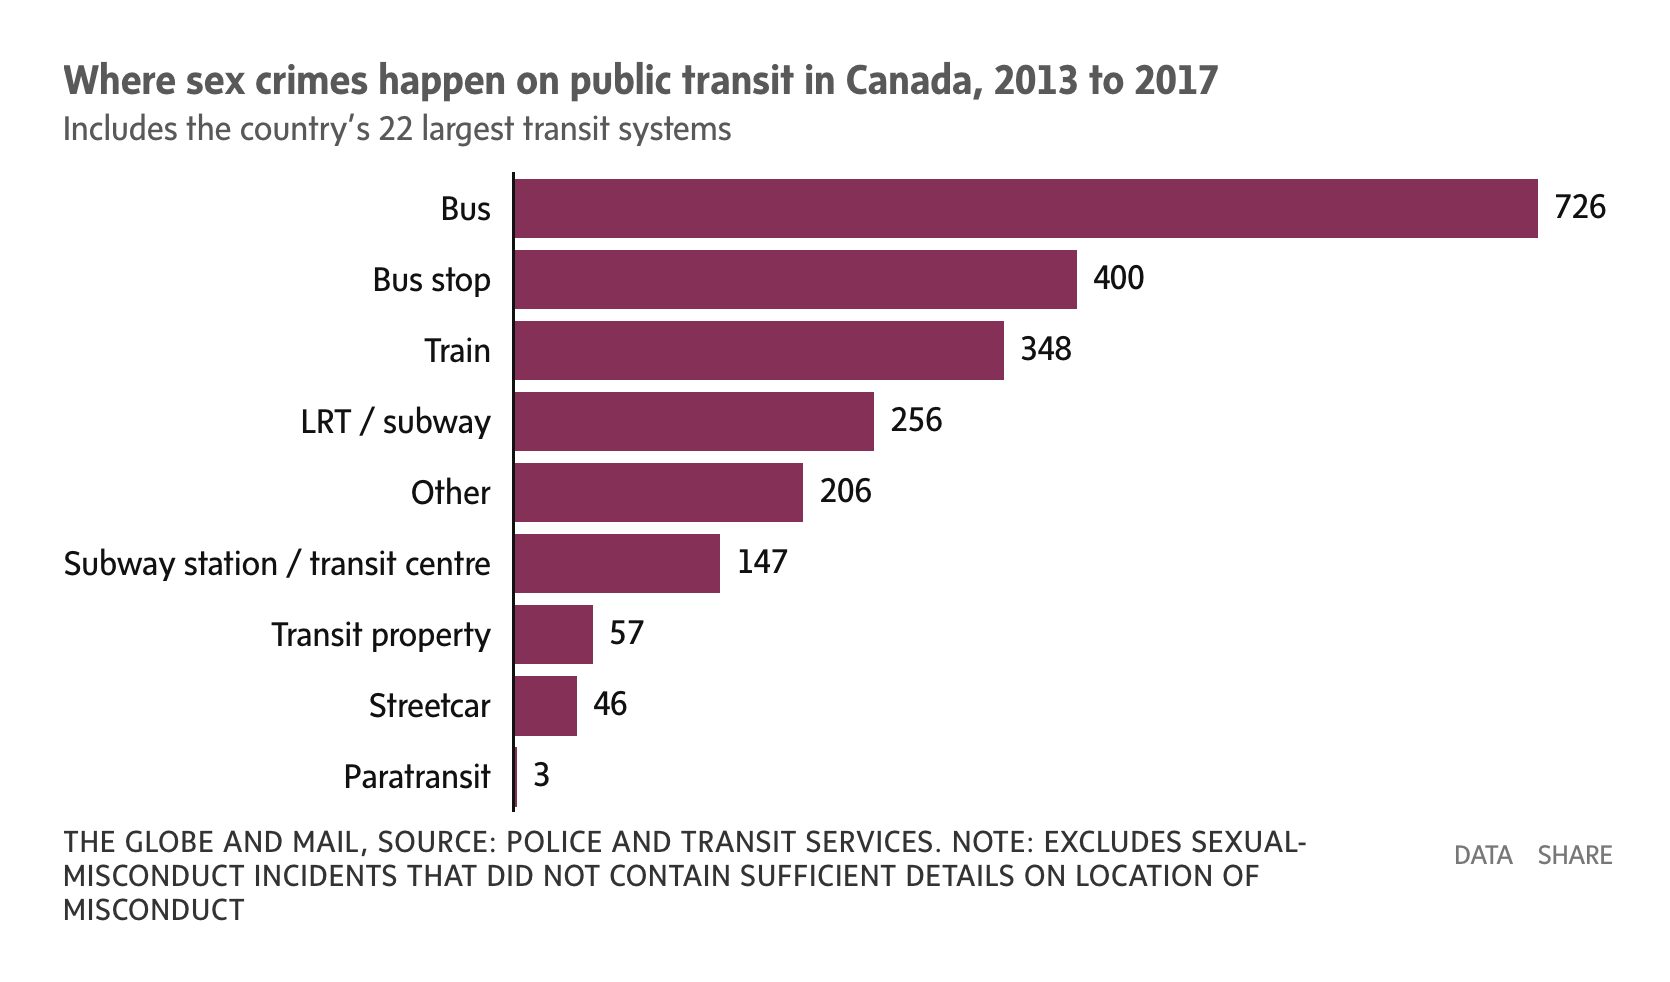 Thumbnail for: Thousands of Canadian transit passengers target of sexual violence between 2013 and 2017, Globe analysis finds